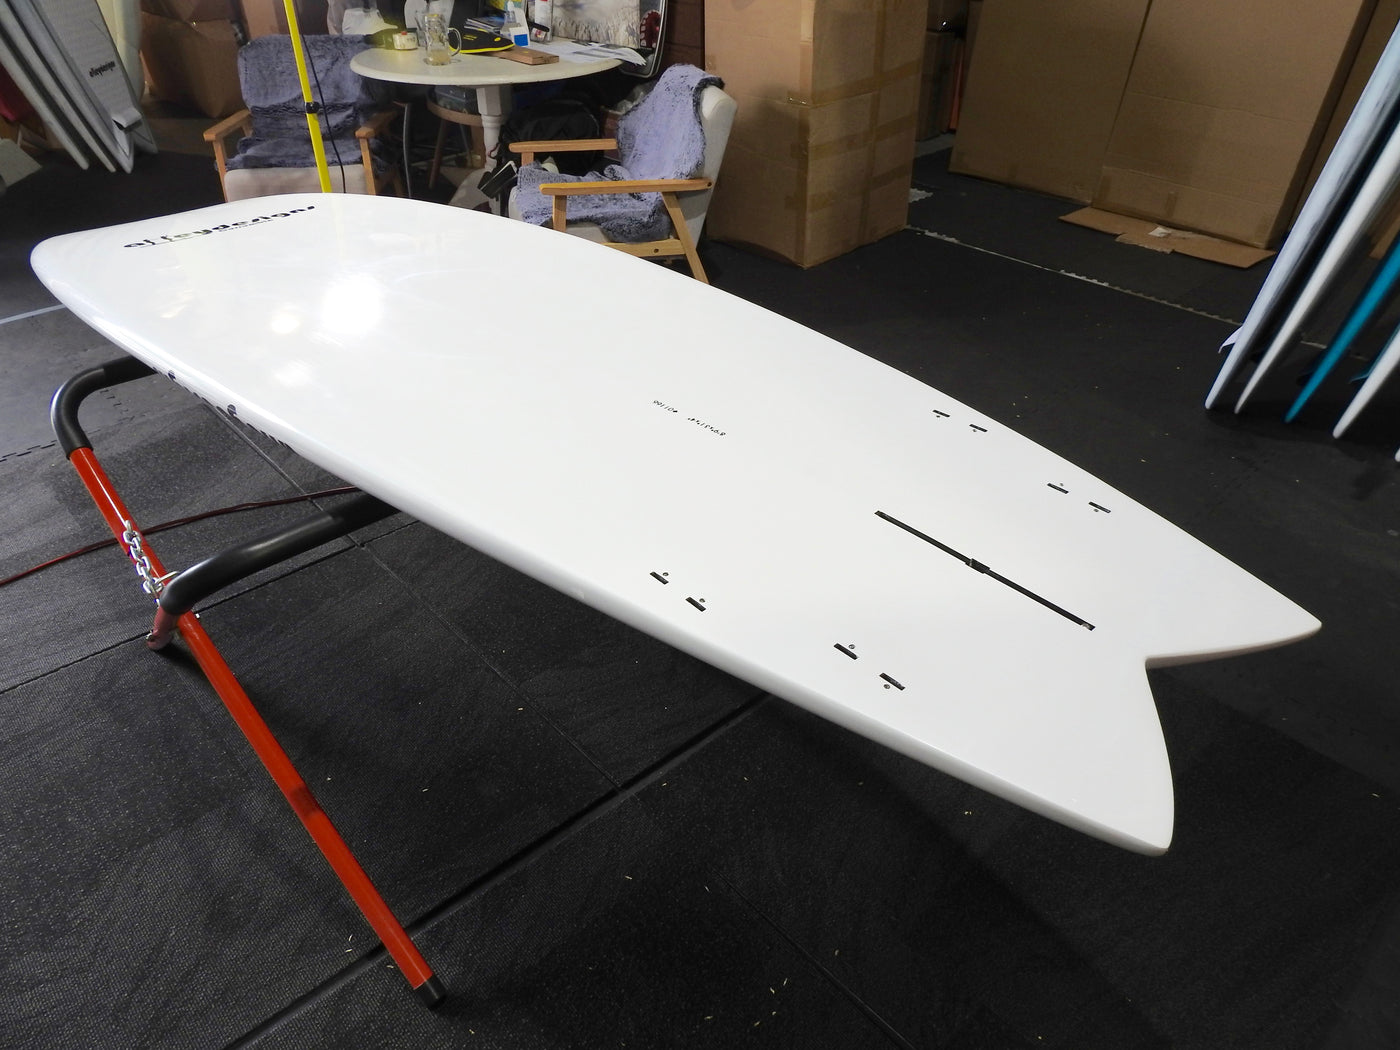 8’9" x 31" x 4" Bamboo White GALAXY BOUNCE SURF SUP - Alleydesigns  Pty Ltd                                             ABN: 44165571264